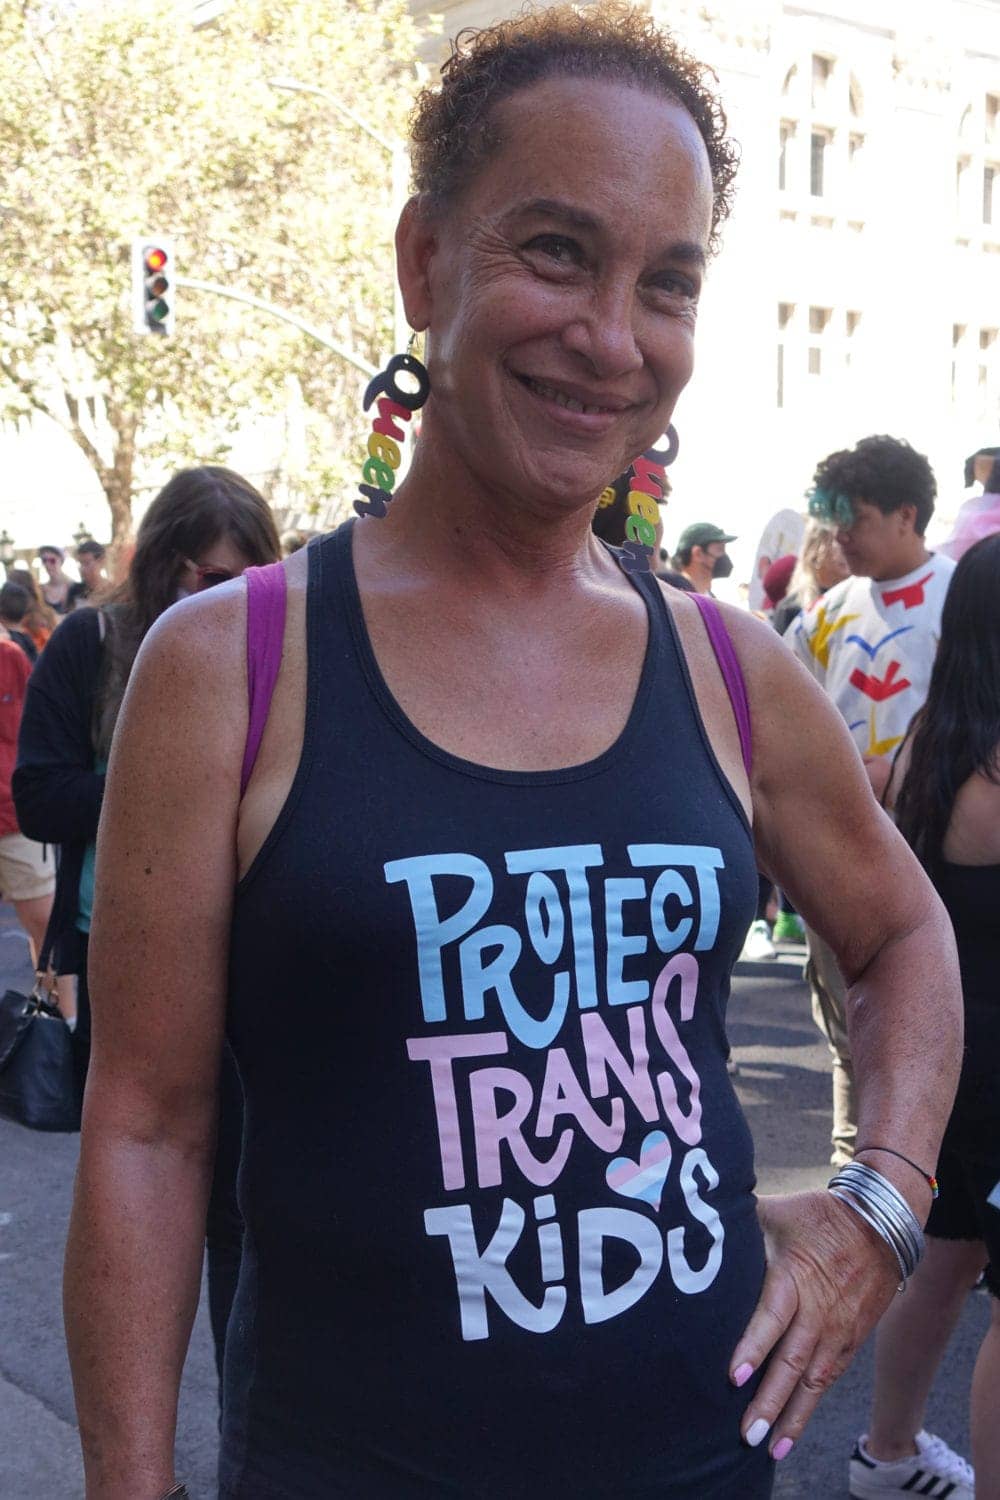 Black-woman-with-‘Protect-Trans-Kids-shirt-by-Biron-Oakland-Pride-092, Black and beautiful, out and proud: Why Black queer visibility matters, Culture Currents 